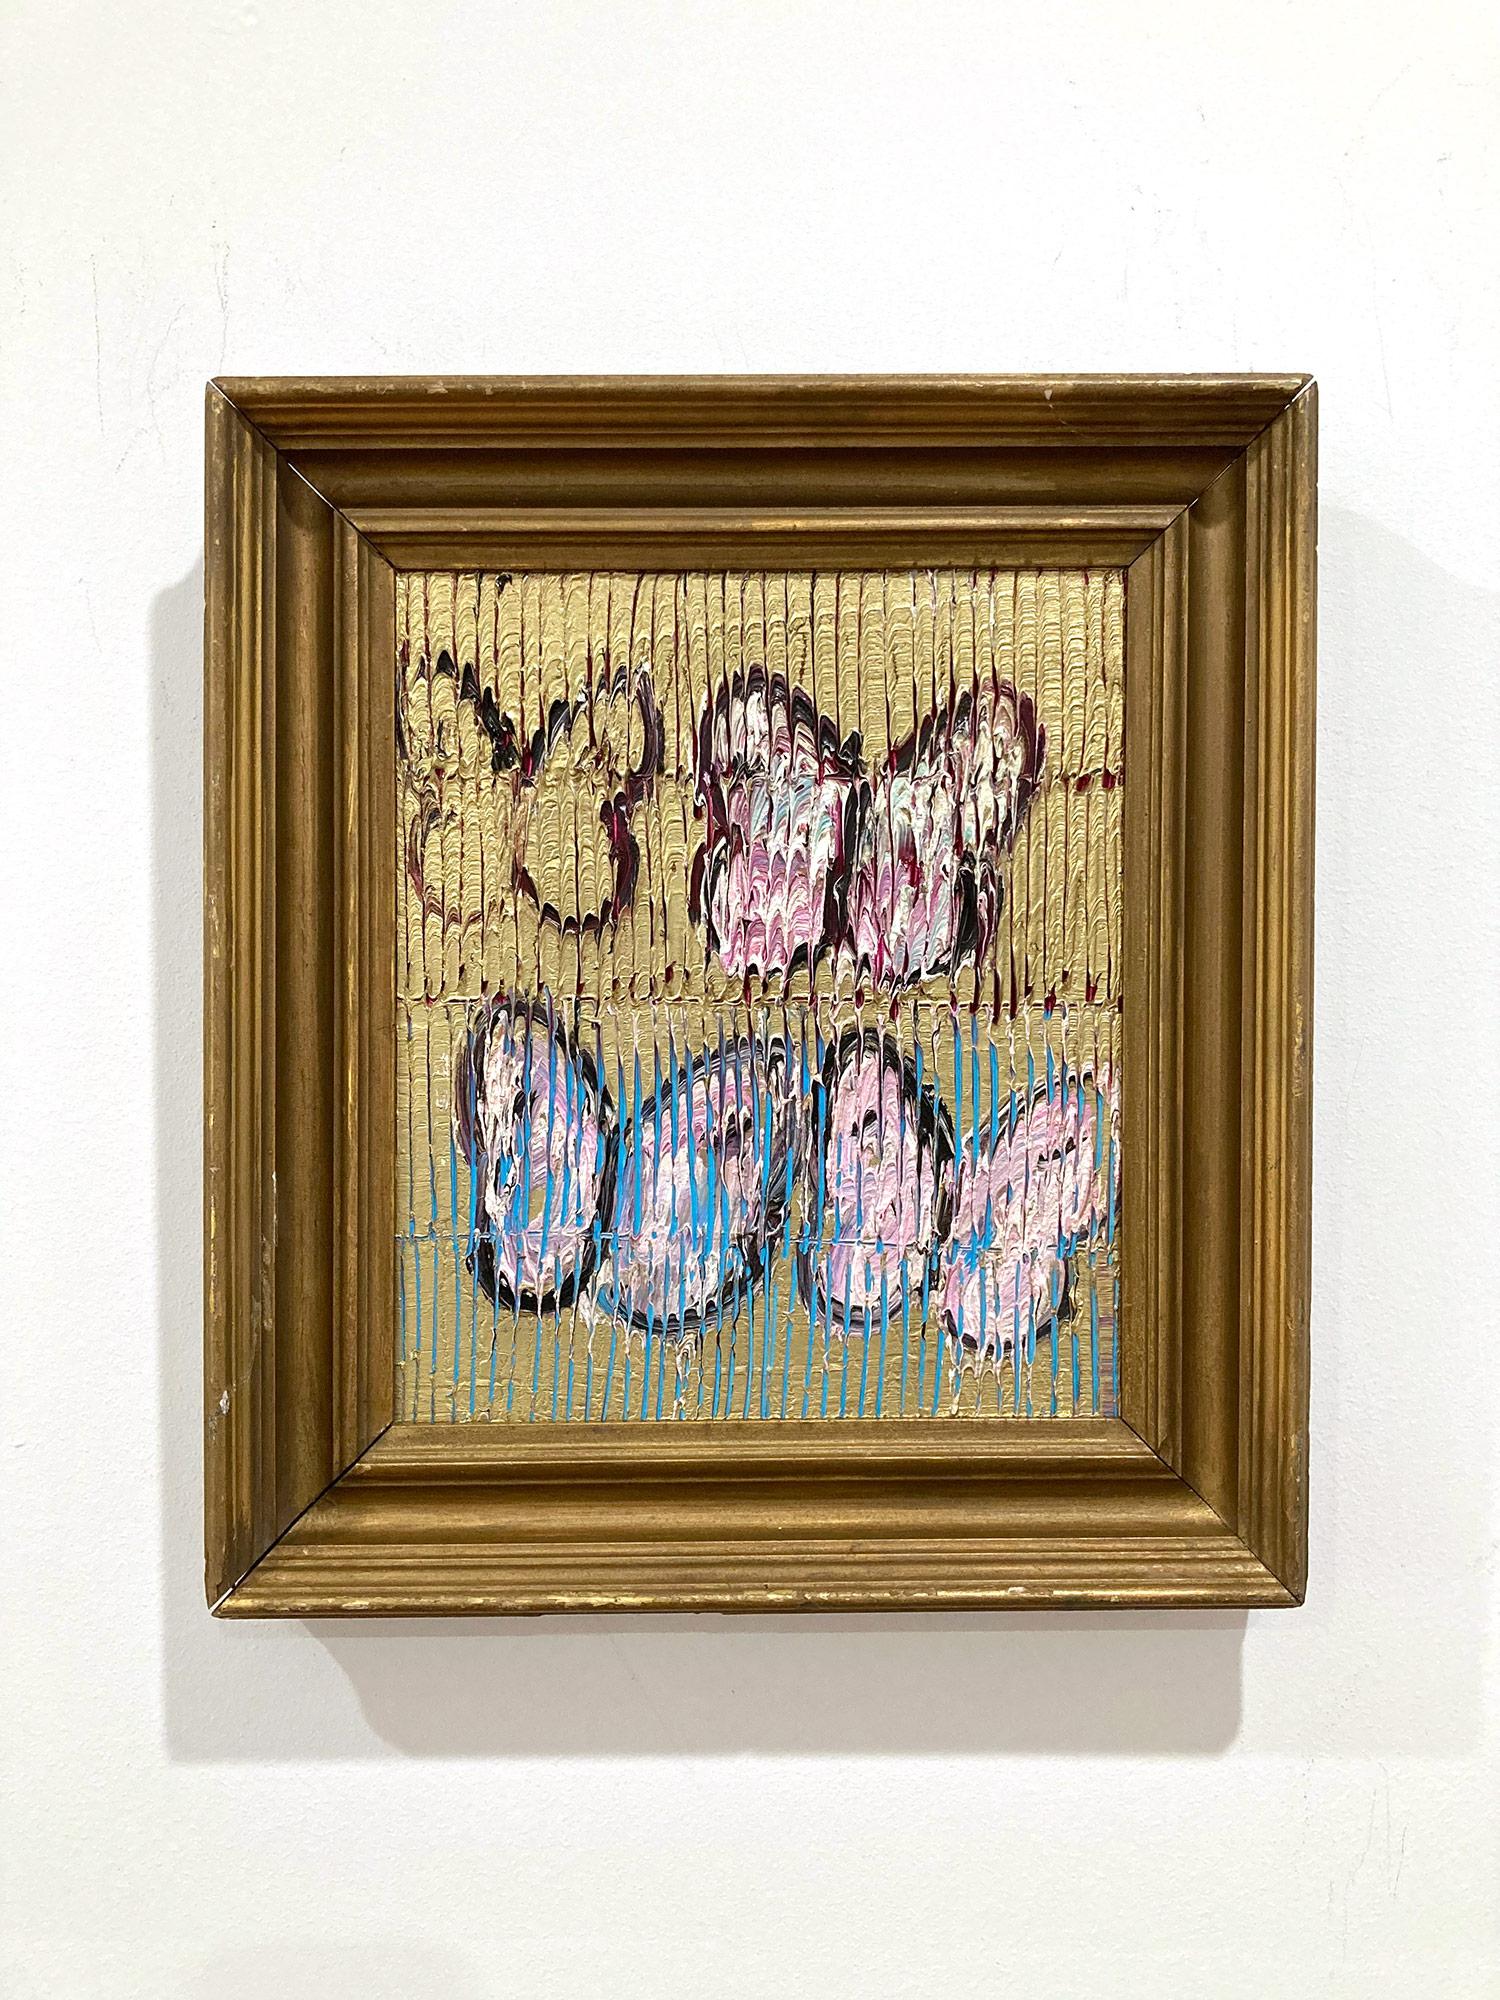 4 Butterflies (Butterflies on Gold Background with Scoring) Oil on Wood Panel 6